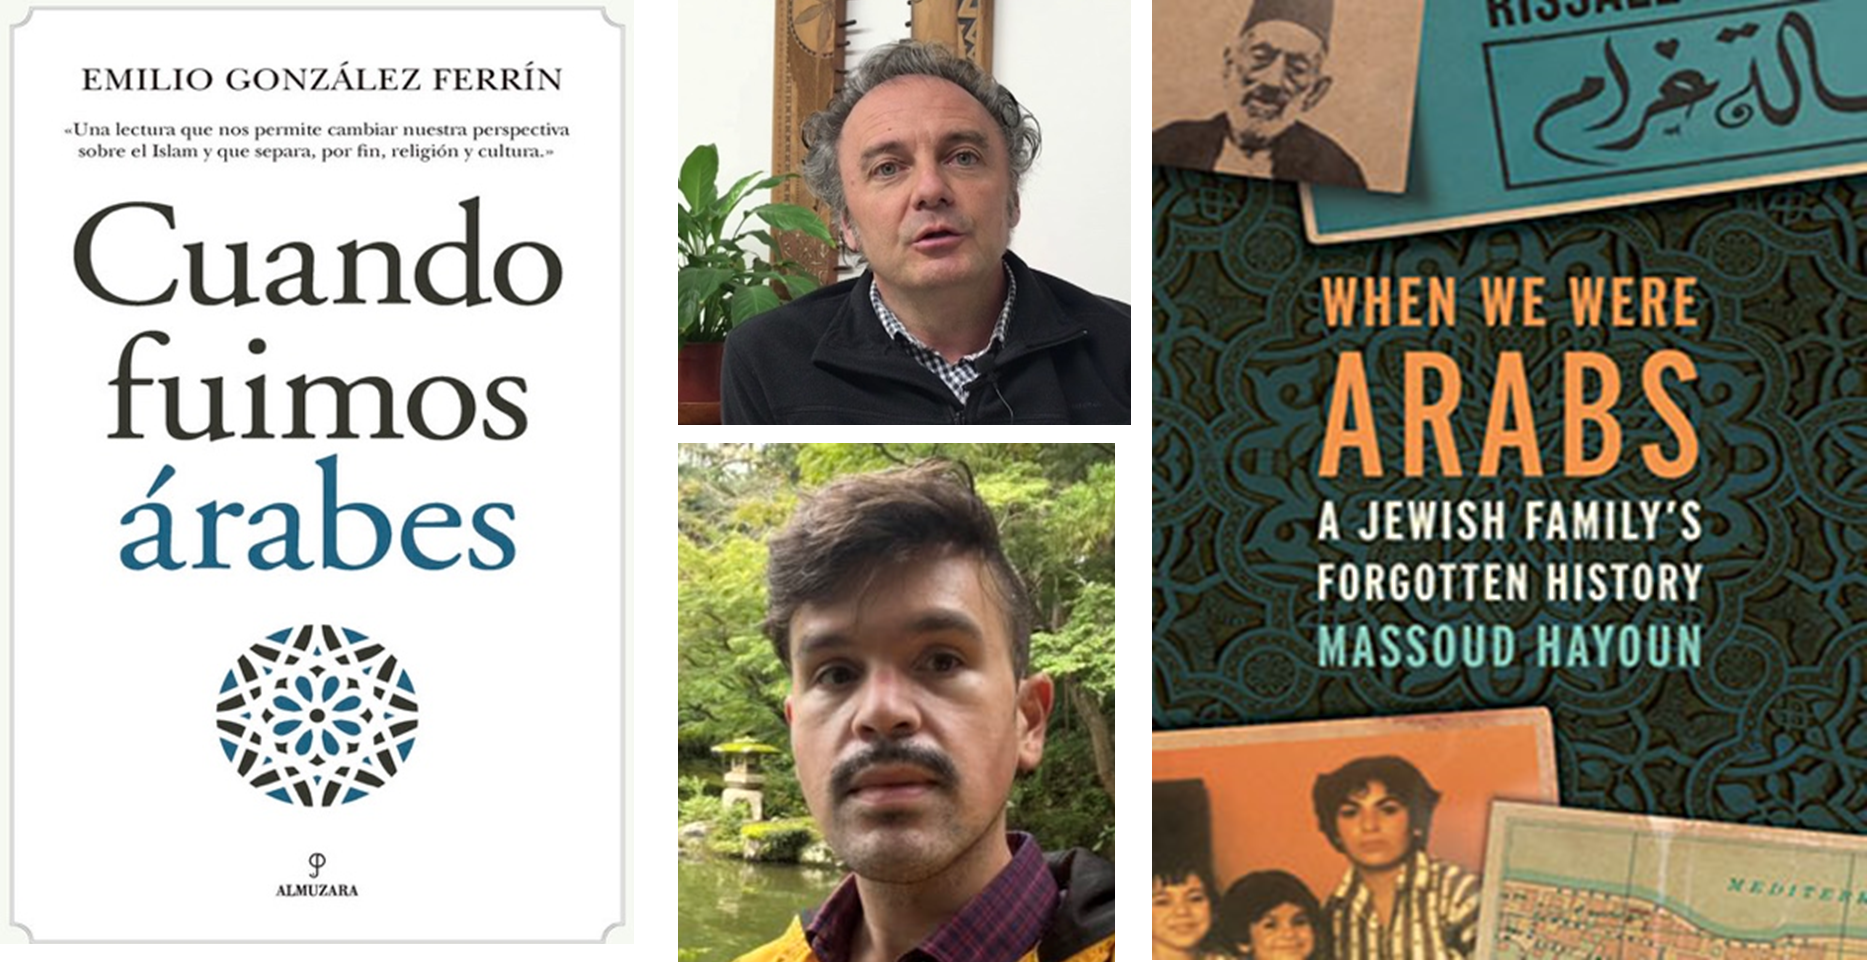 Event banner. Left aligned is a cover of a book reading, &quot;Cuando fuimos arabes.&quot; The middle alignment includes the headshots of author Emilio González Ferrín and journalist Massoud Hayoun. The right alignment includes a book cover reading, &quot;When we Were Arabs.&quot;